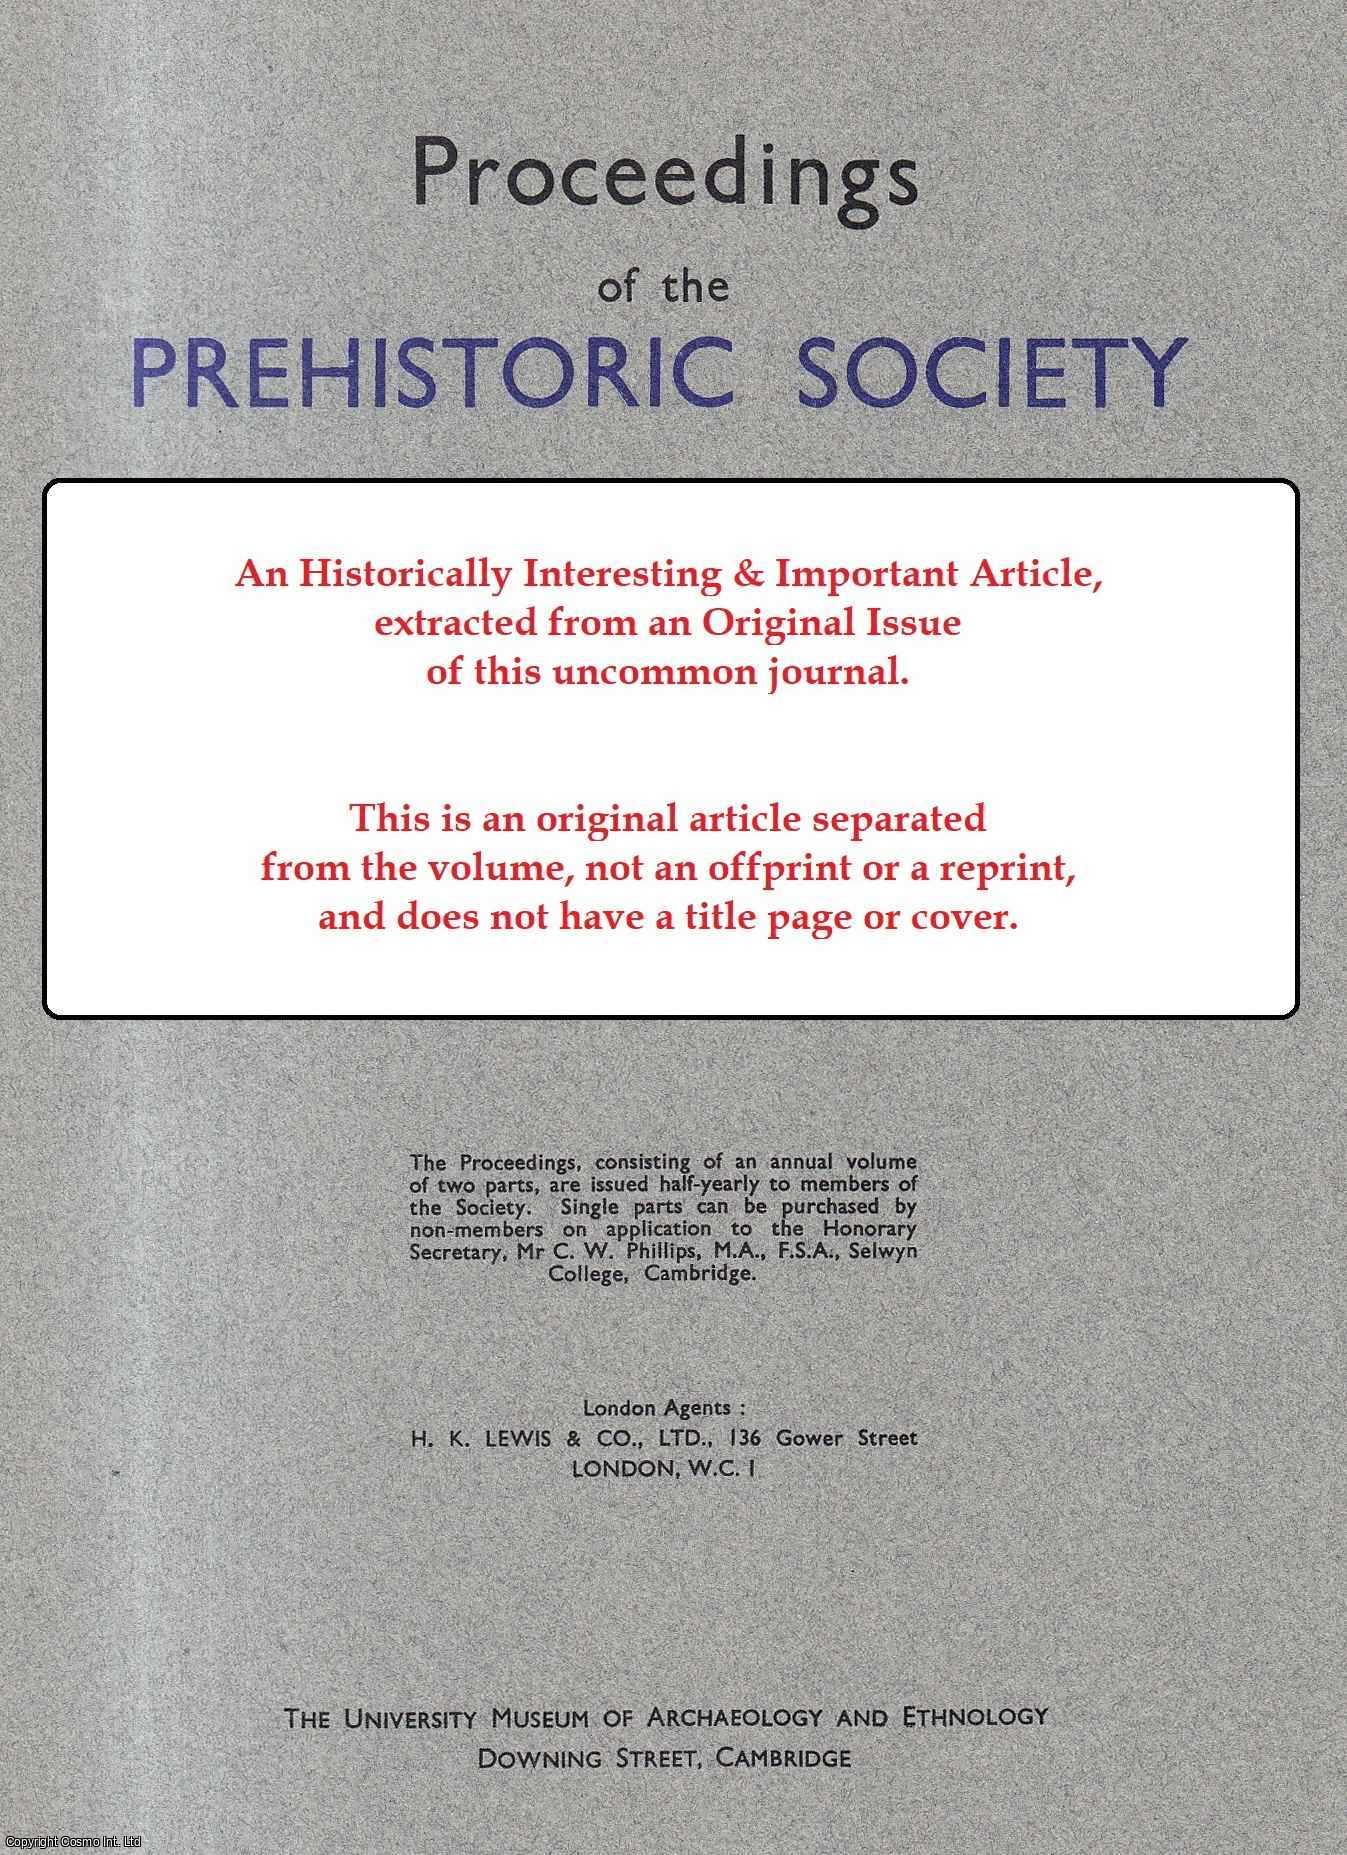 Stuart Piggott - A Note on The elative Chronology of The English Long Barrows. An original article from Proceedings of the Prehistoric Society, 1935.